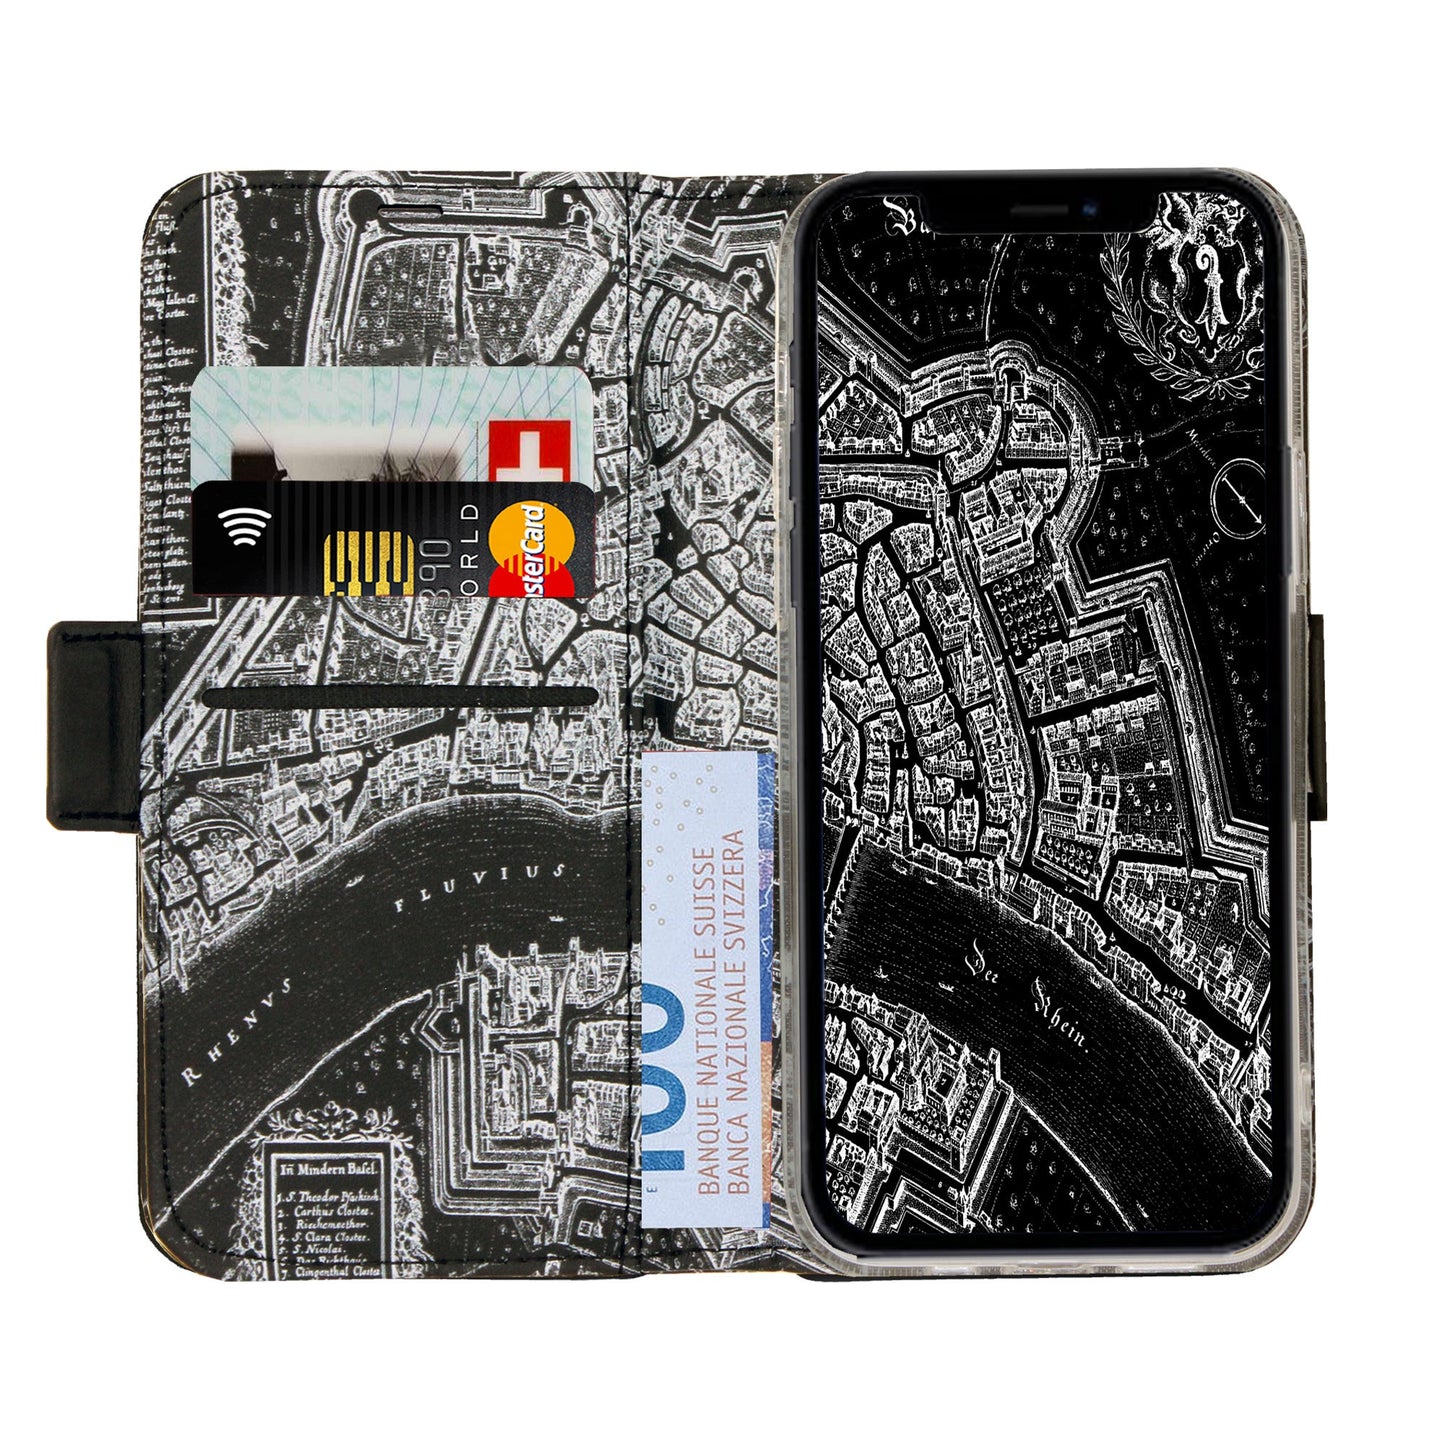 Basel Merian Negative Victor Case for iPhone 11 Pro Max